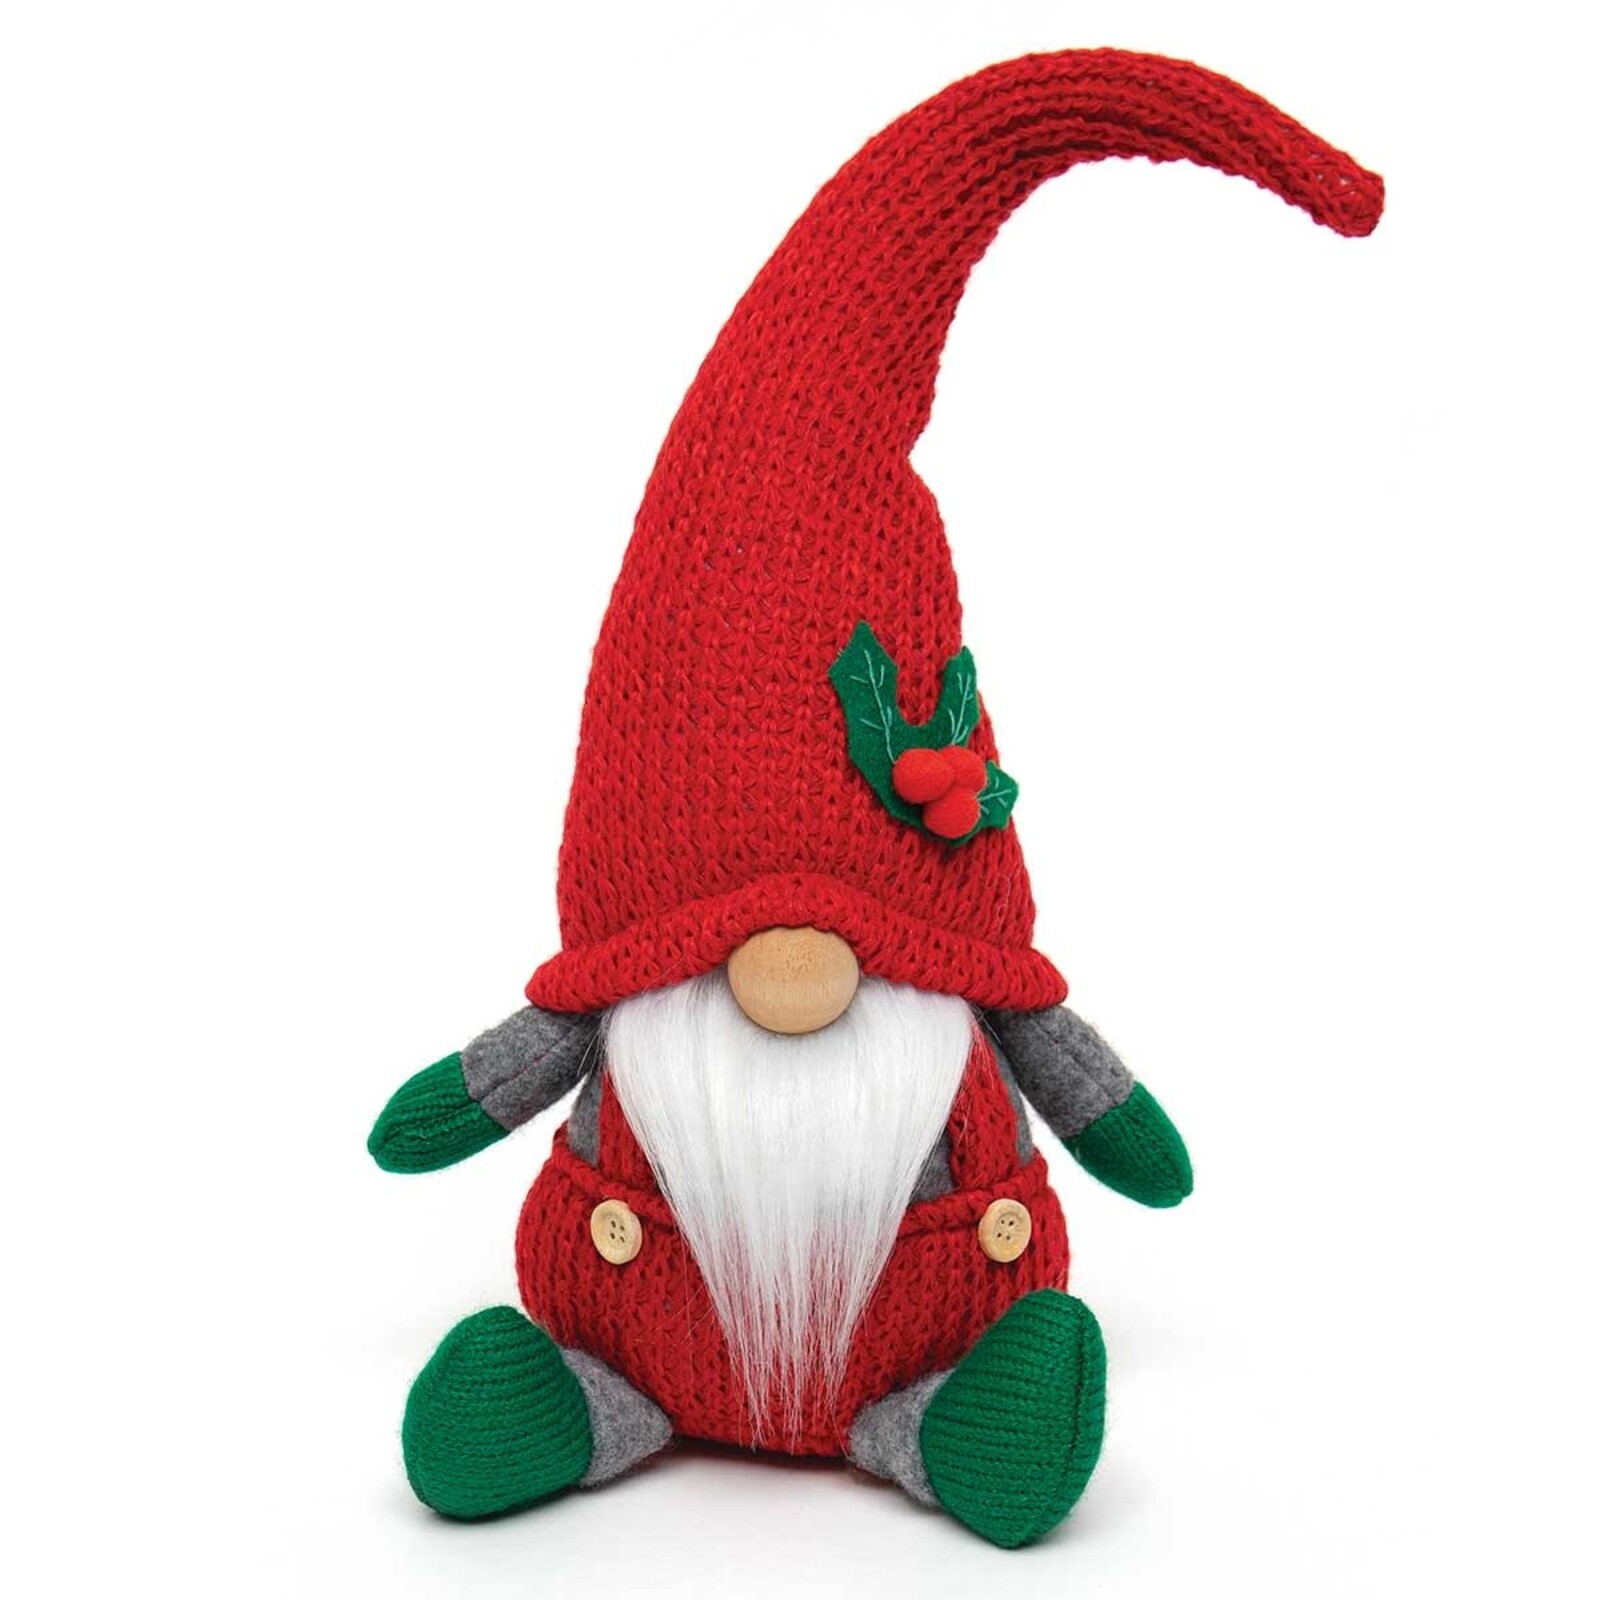 Meravic HOLLY HAT GNOME ORNAMENT   R8713 loading=